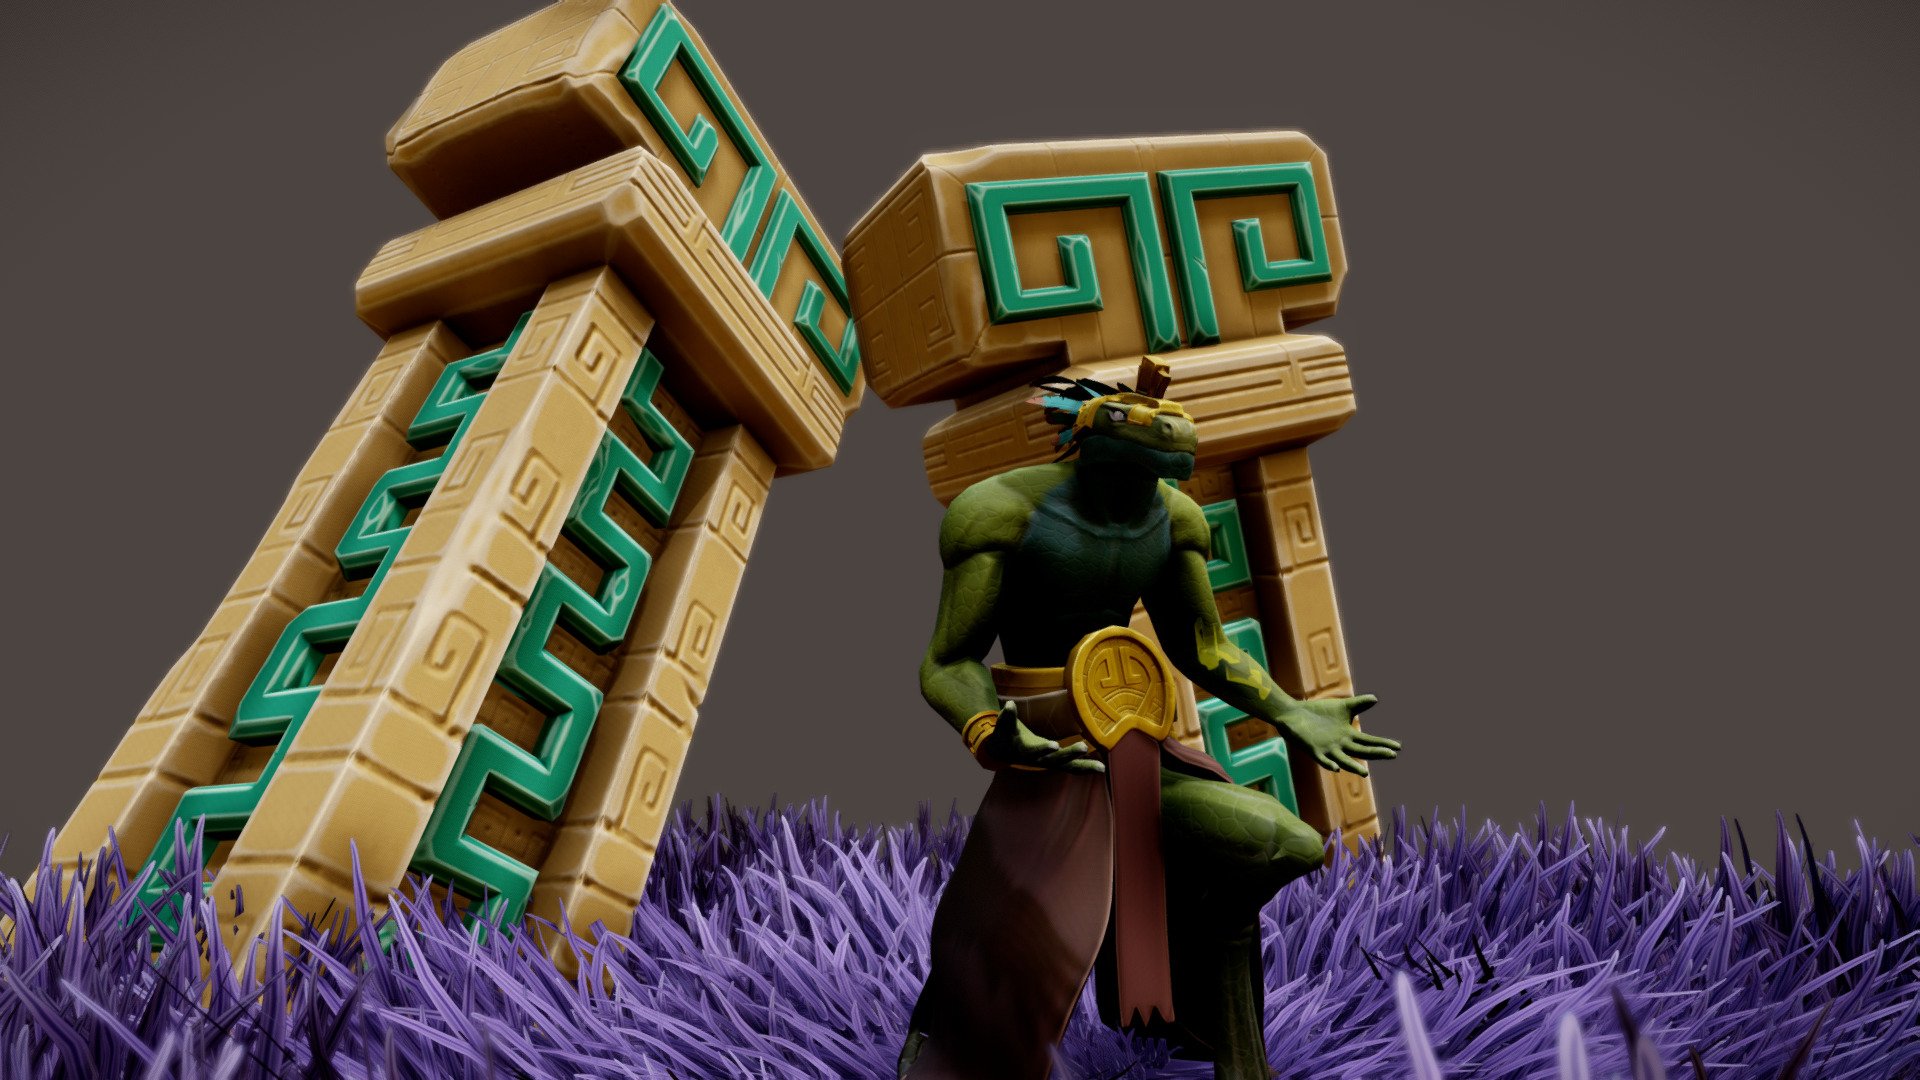 Here is a small diorama of The Daragon, a lizardman warrior named Daginn, embodies a very tangible urban legend. His mission is to protect the Inca sanctuary, where a priceless gemstone rests safely. This stone establishes a bridge between the world of gods and the living.

was made for an examen at Heaj Bac 2

Software used: Maya, Substance painter, Zbrush &amp; Photoshop - Stylized Diorama | The Daragon - 3D model by Jackmano 3d model